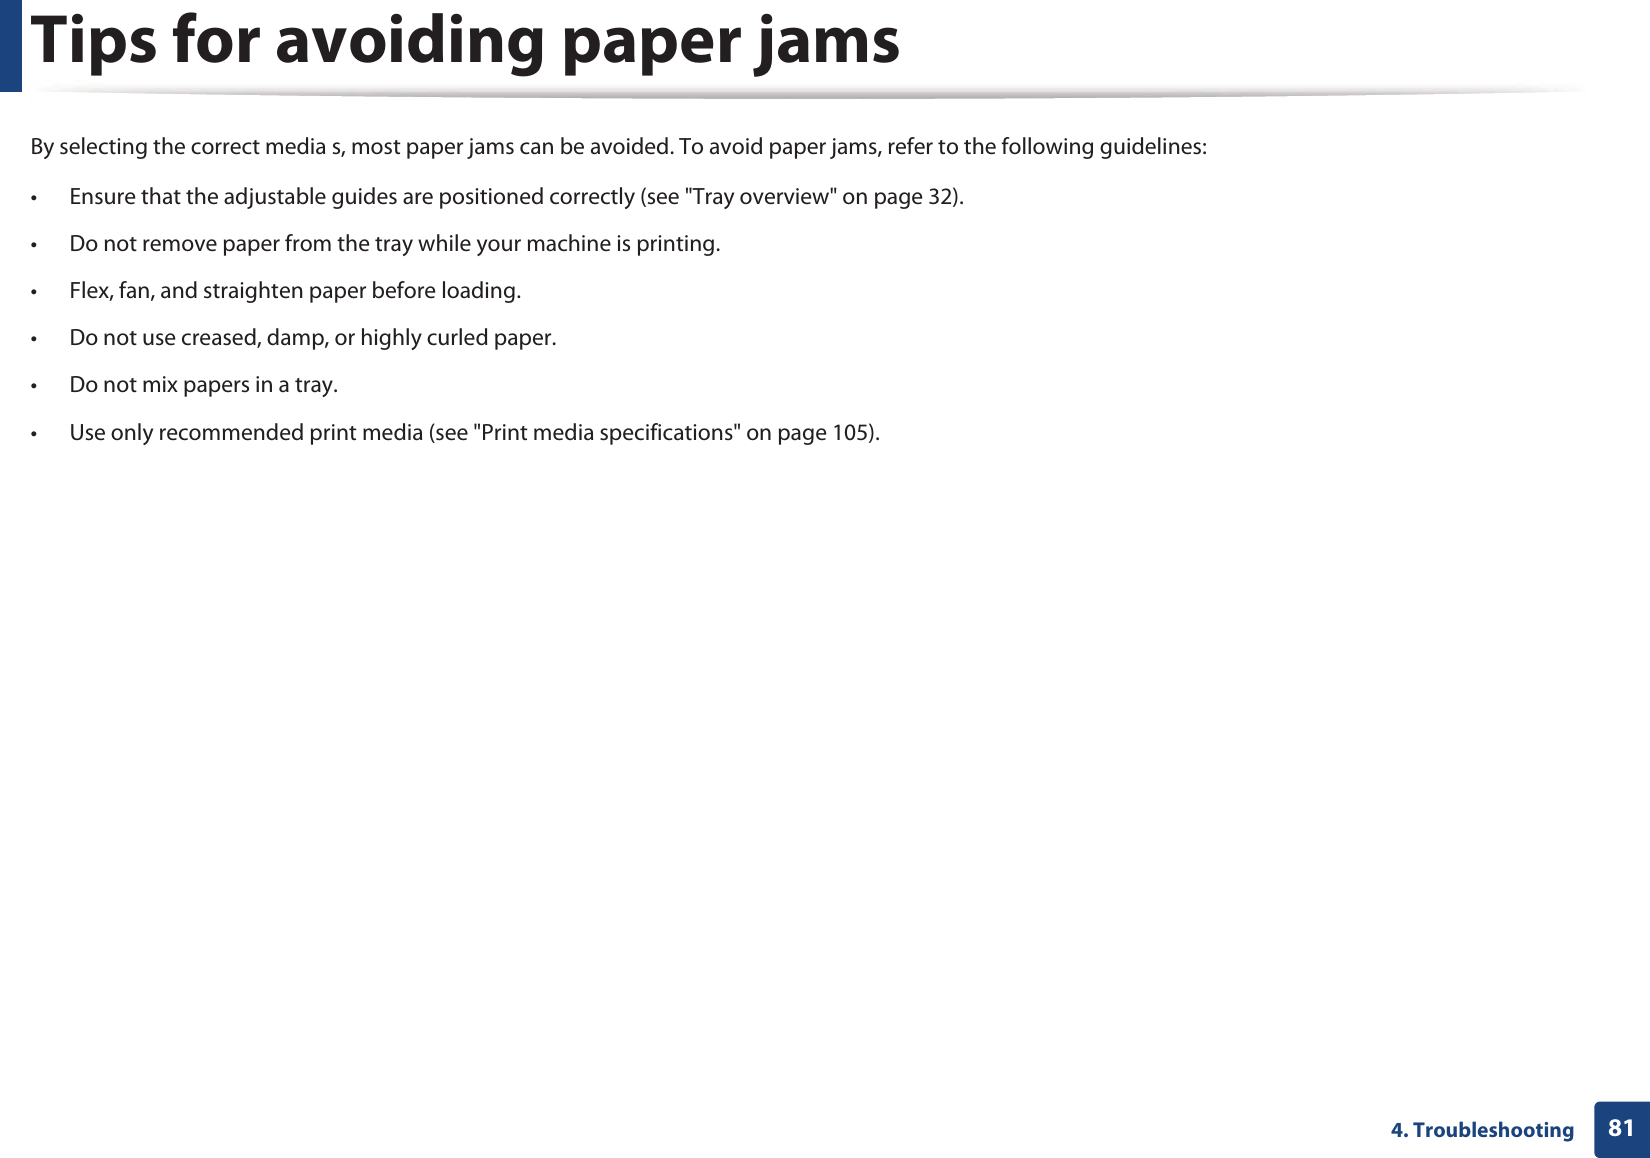 814. TroubleshootingTips for avoiding paper jamsBy selecting the correct media s, most paper jams can be avoided. To avoid paper jams, refer to the following guidelines:• Ensure that the adjustable guides are positioned correctly (see &quot;Tray overview&quot; on page 32).• Do not remove paper from the tray while your machine is printing.• Flex, fan, and straighten paper before loading. • Do not use creased, damp, or highly curled paper.• Do not mix papers in a tray.• Use only recommended print media (see &quot;Print media specifications&quot; on page 105).